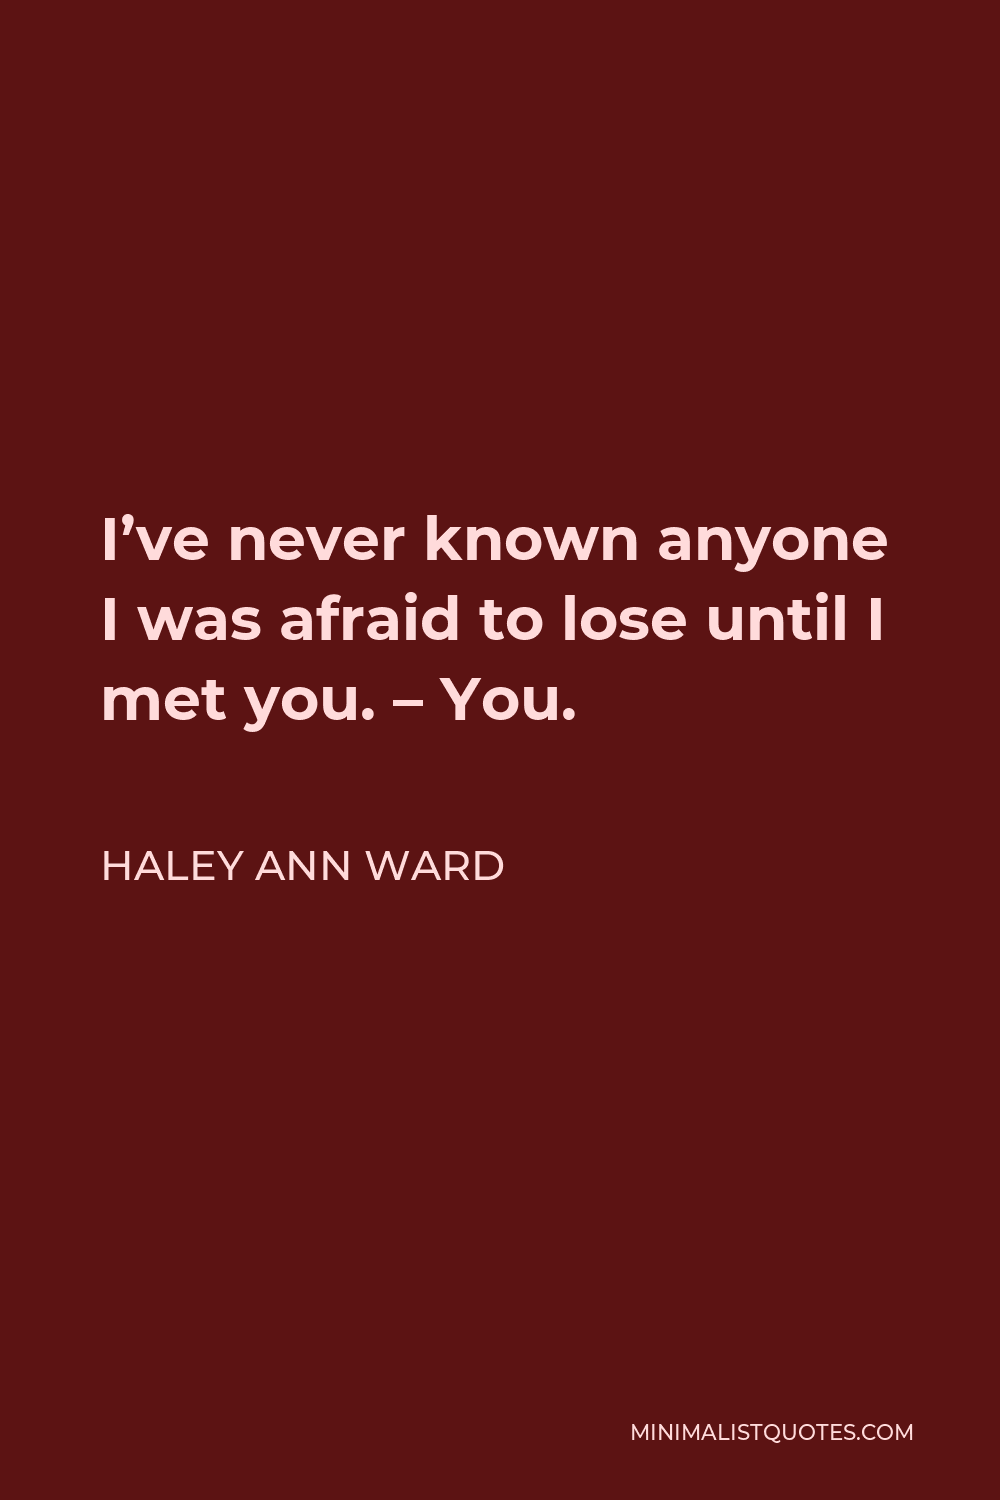 Haley Ann Ward Quote - I’ve never known anyone I was afraid to lose until I met you. – You.